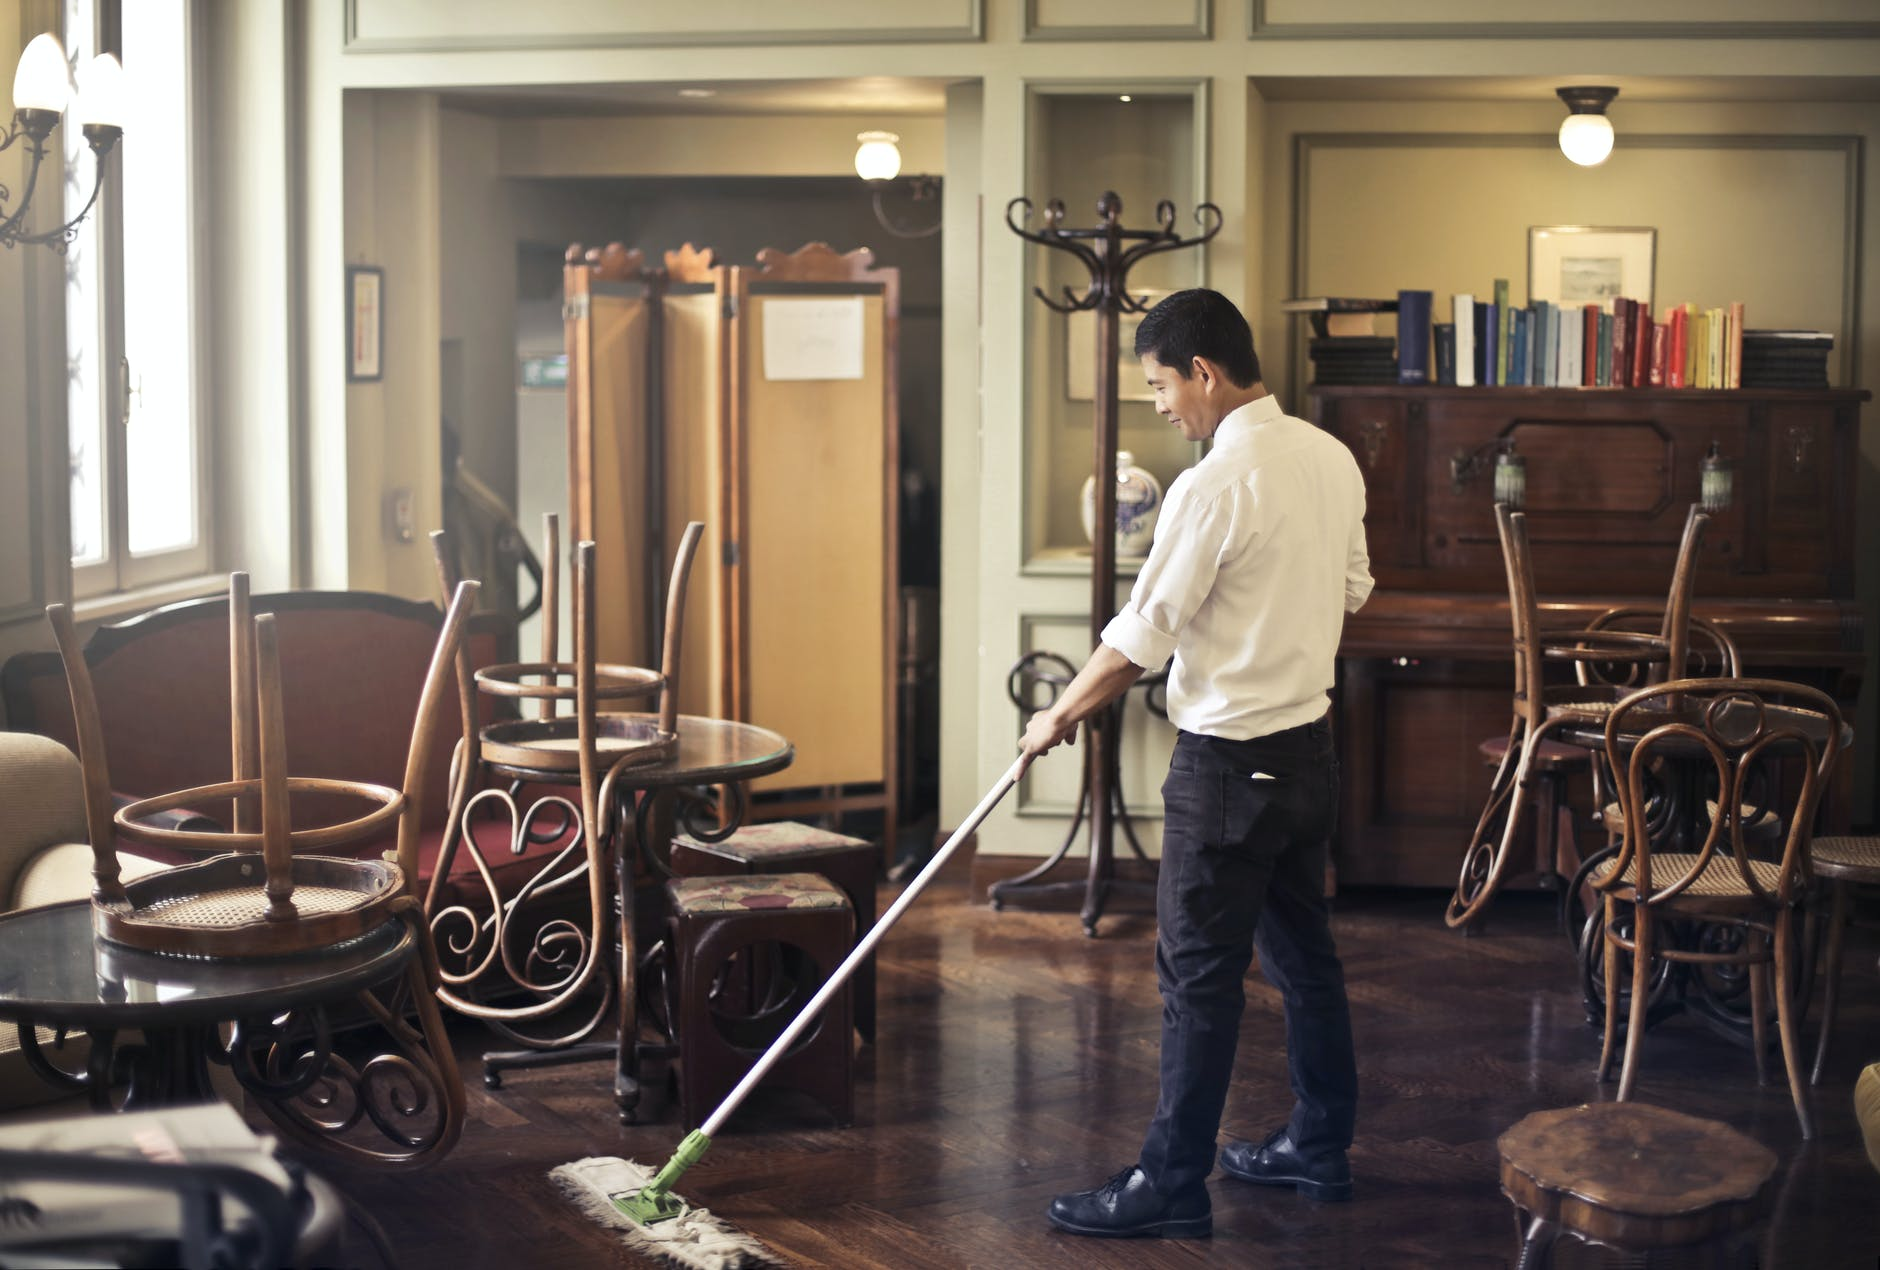  Clean and mop moisture to minimize residential water damage